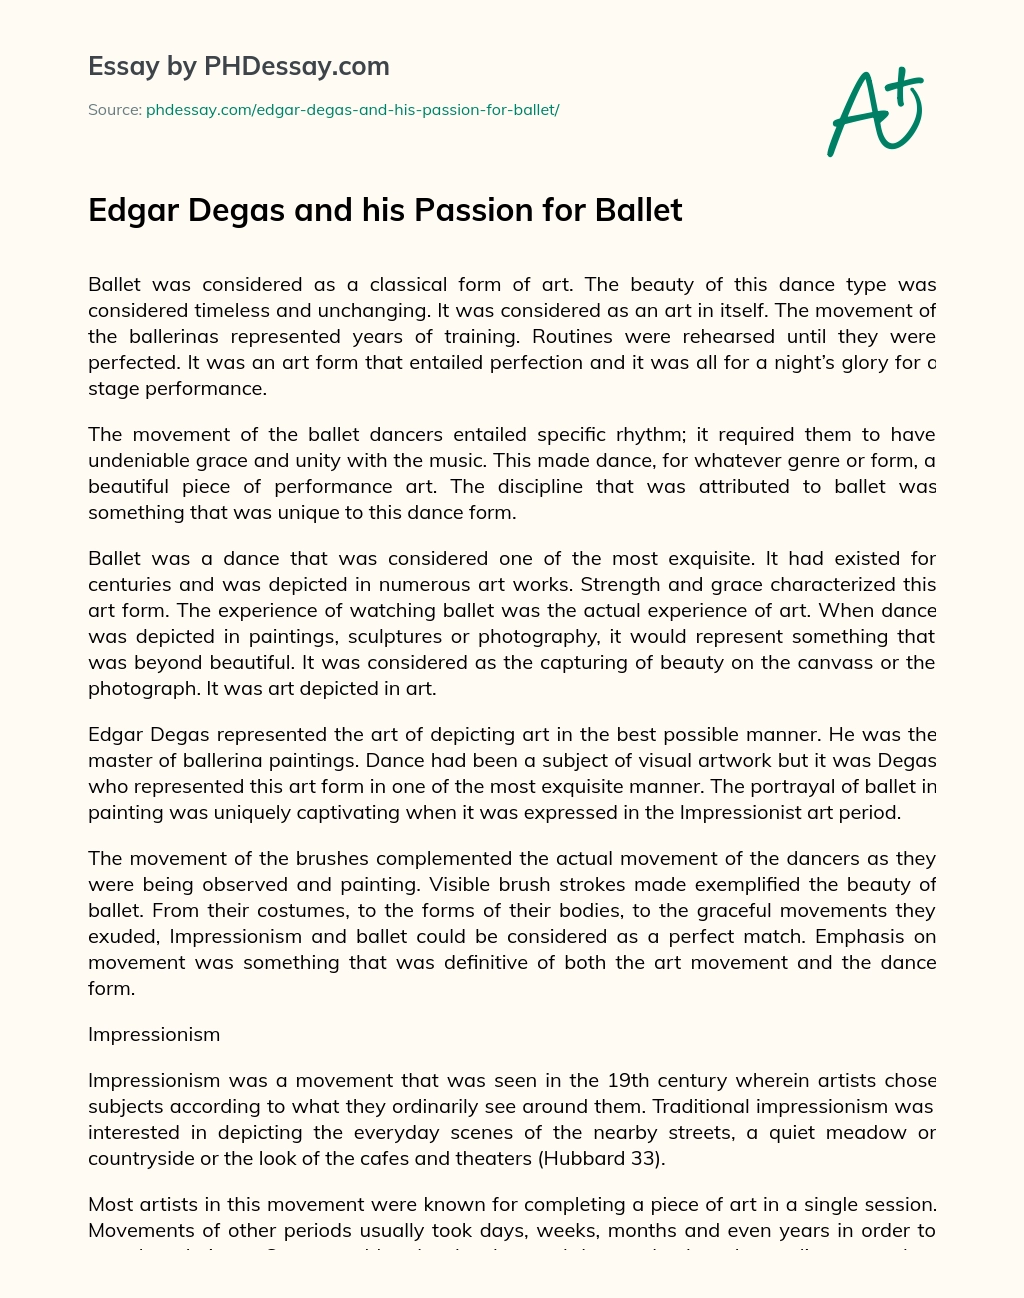 Edgar Degas and his Passion for Ballet essay